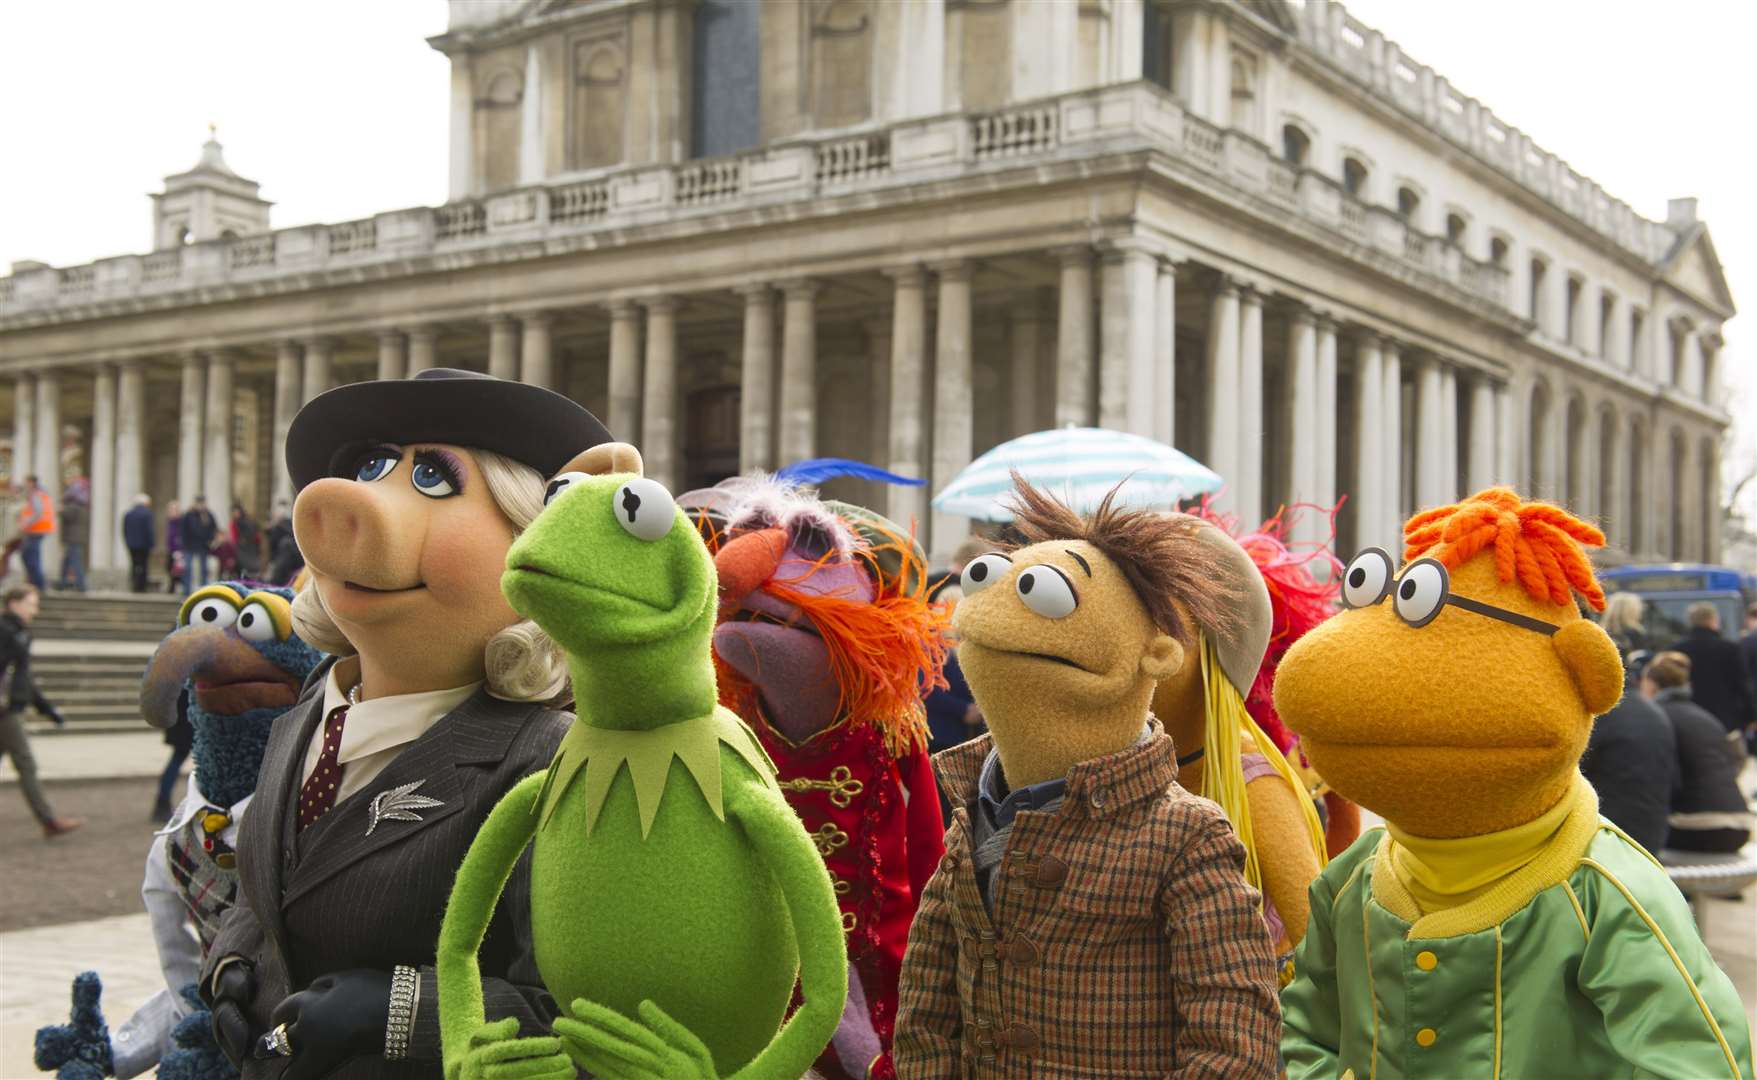 Voices of the Muppets in Muppets Most Wanted, with Gonzo (Dave Goelz), Miss Piggy (Eric Jacobson), Kermit (Steve Whitmire), Floyd (Matt Vogel), Walter (Peter Linz) & Scooter (David Rudman). Picture: PA Photo/2013 Disney Enterprises, Inc